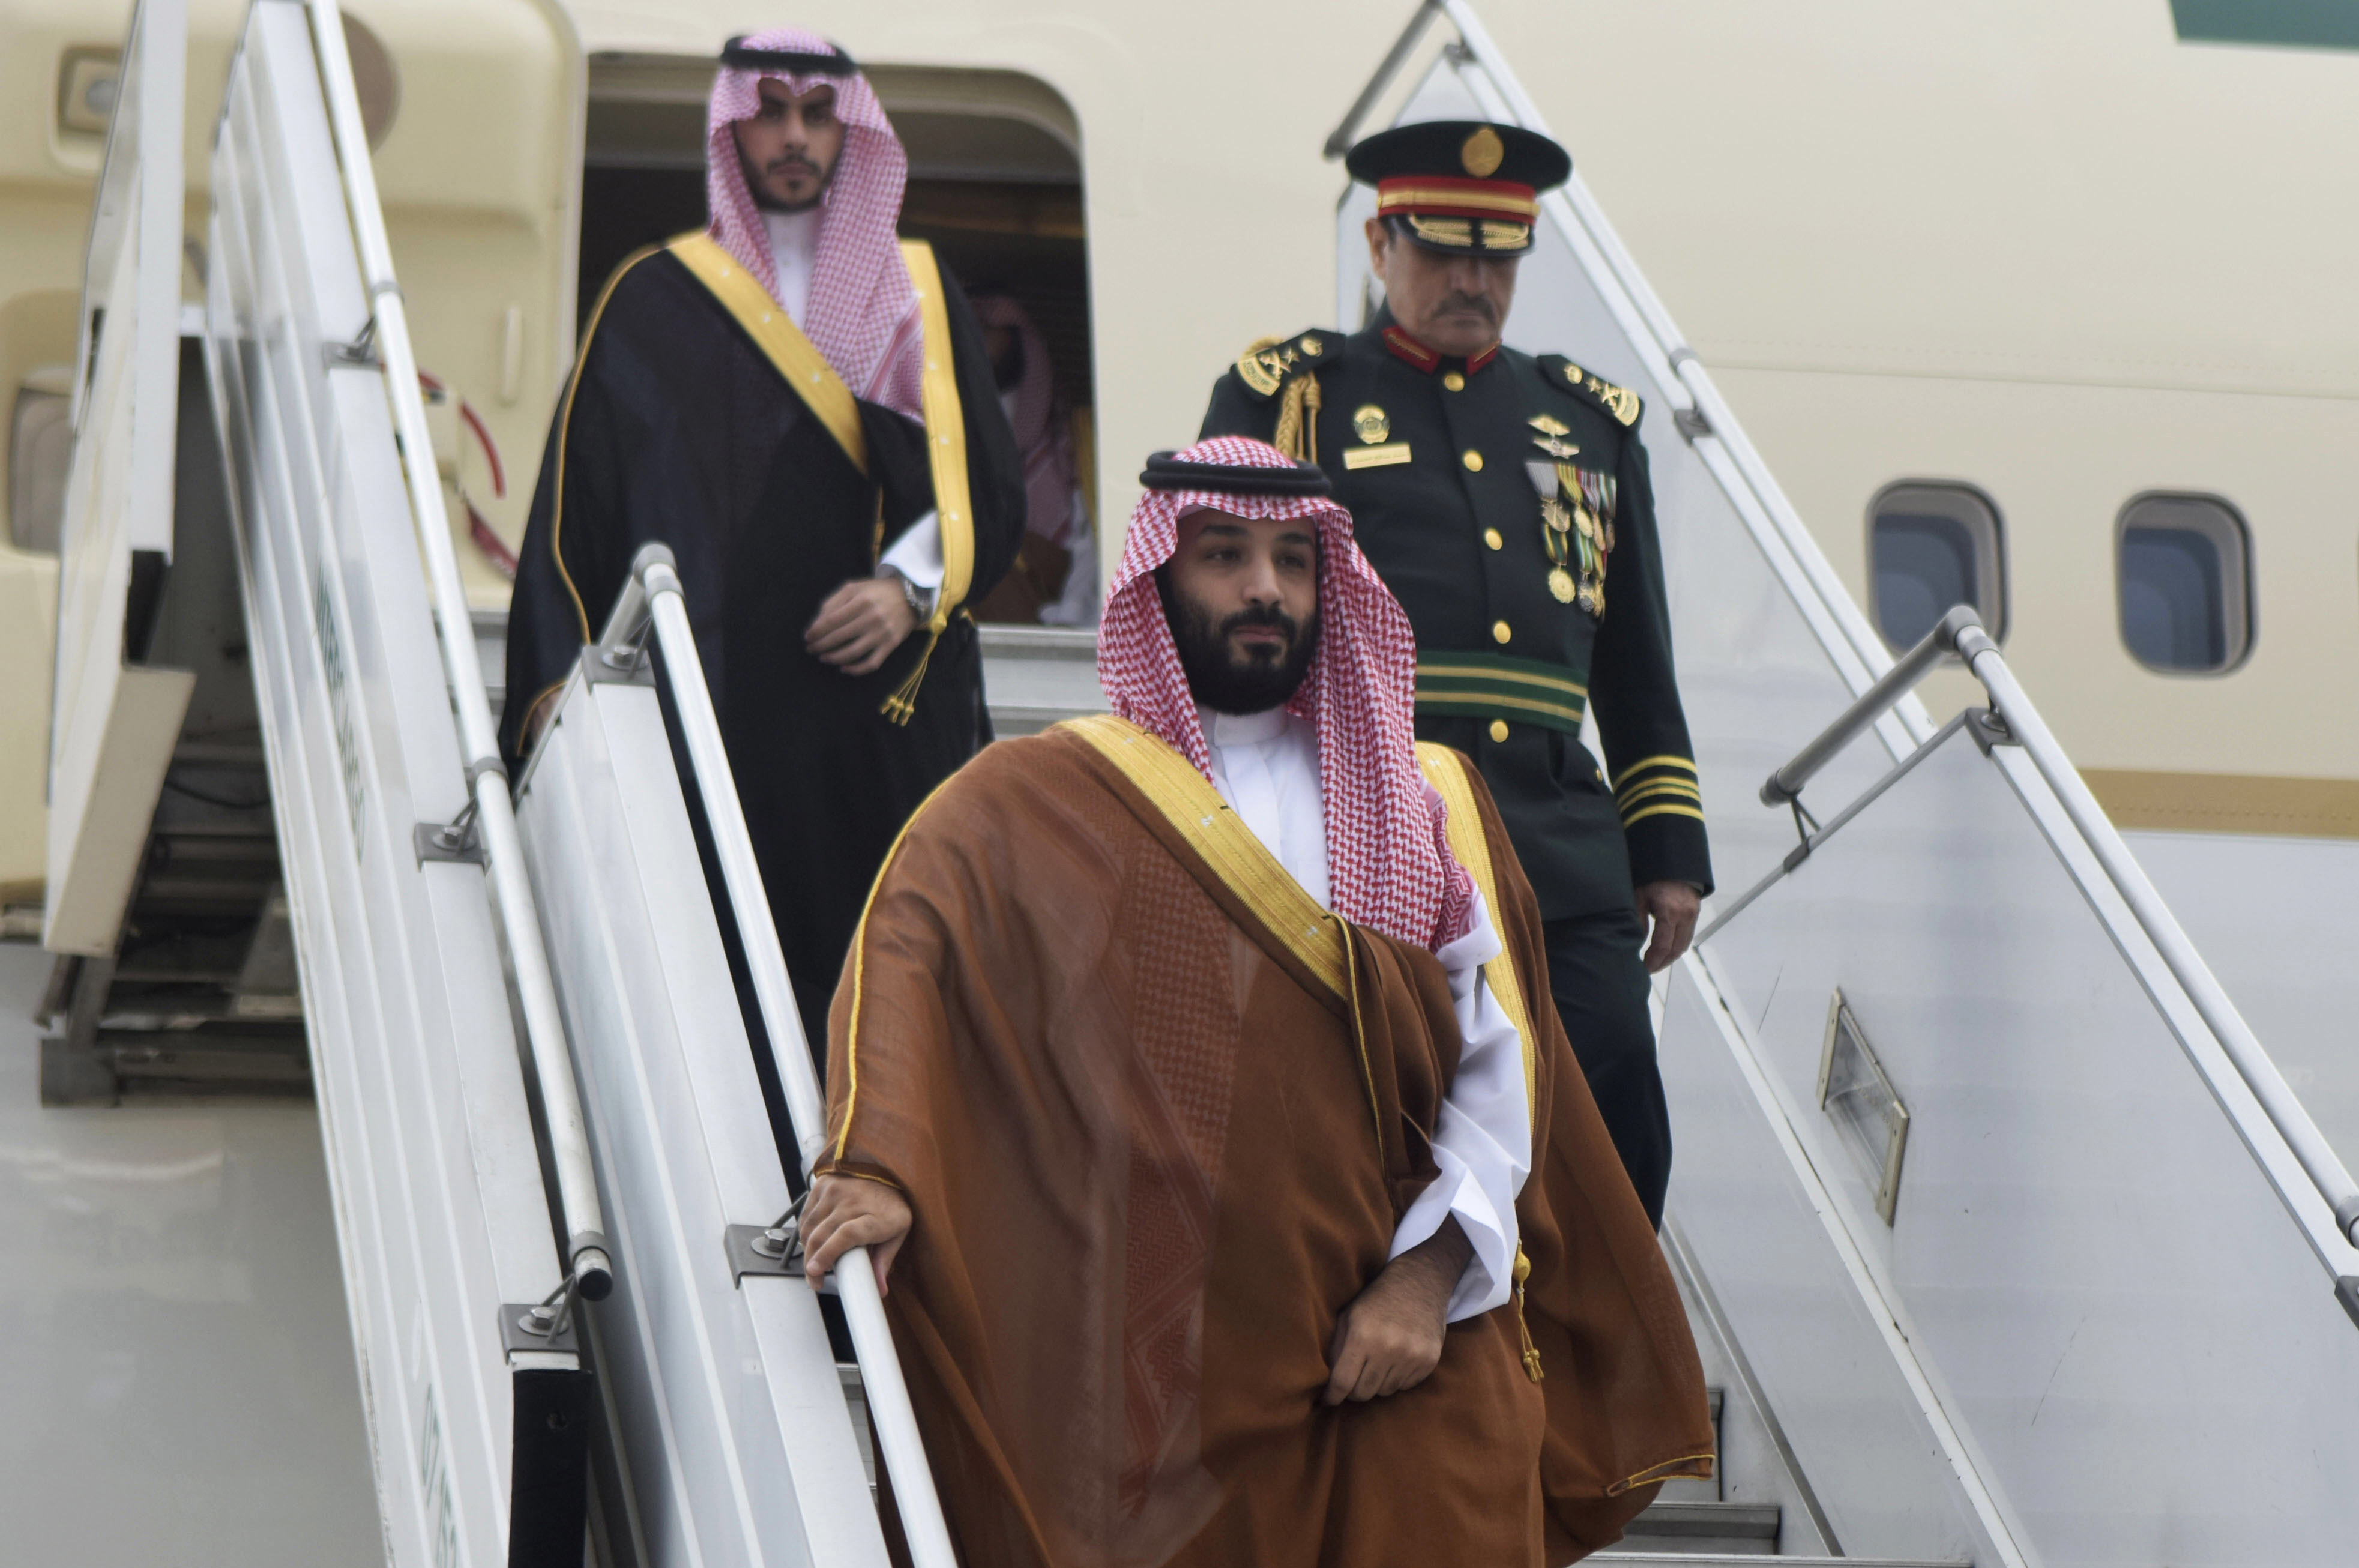 Saudi Arabia's Crown Prince Mohammed bin Salman at the airport in Buenos Aires